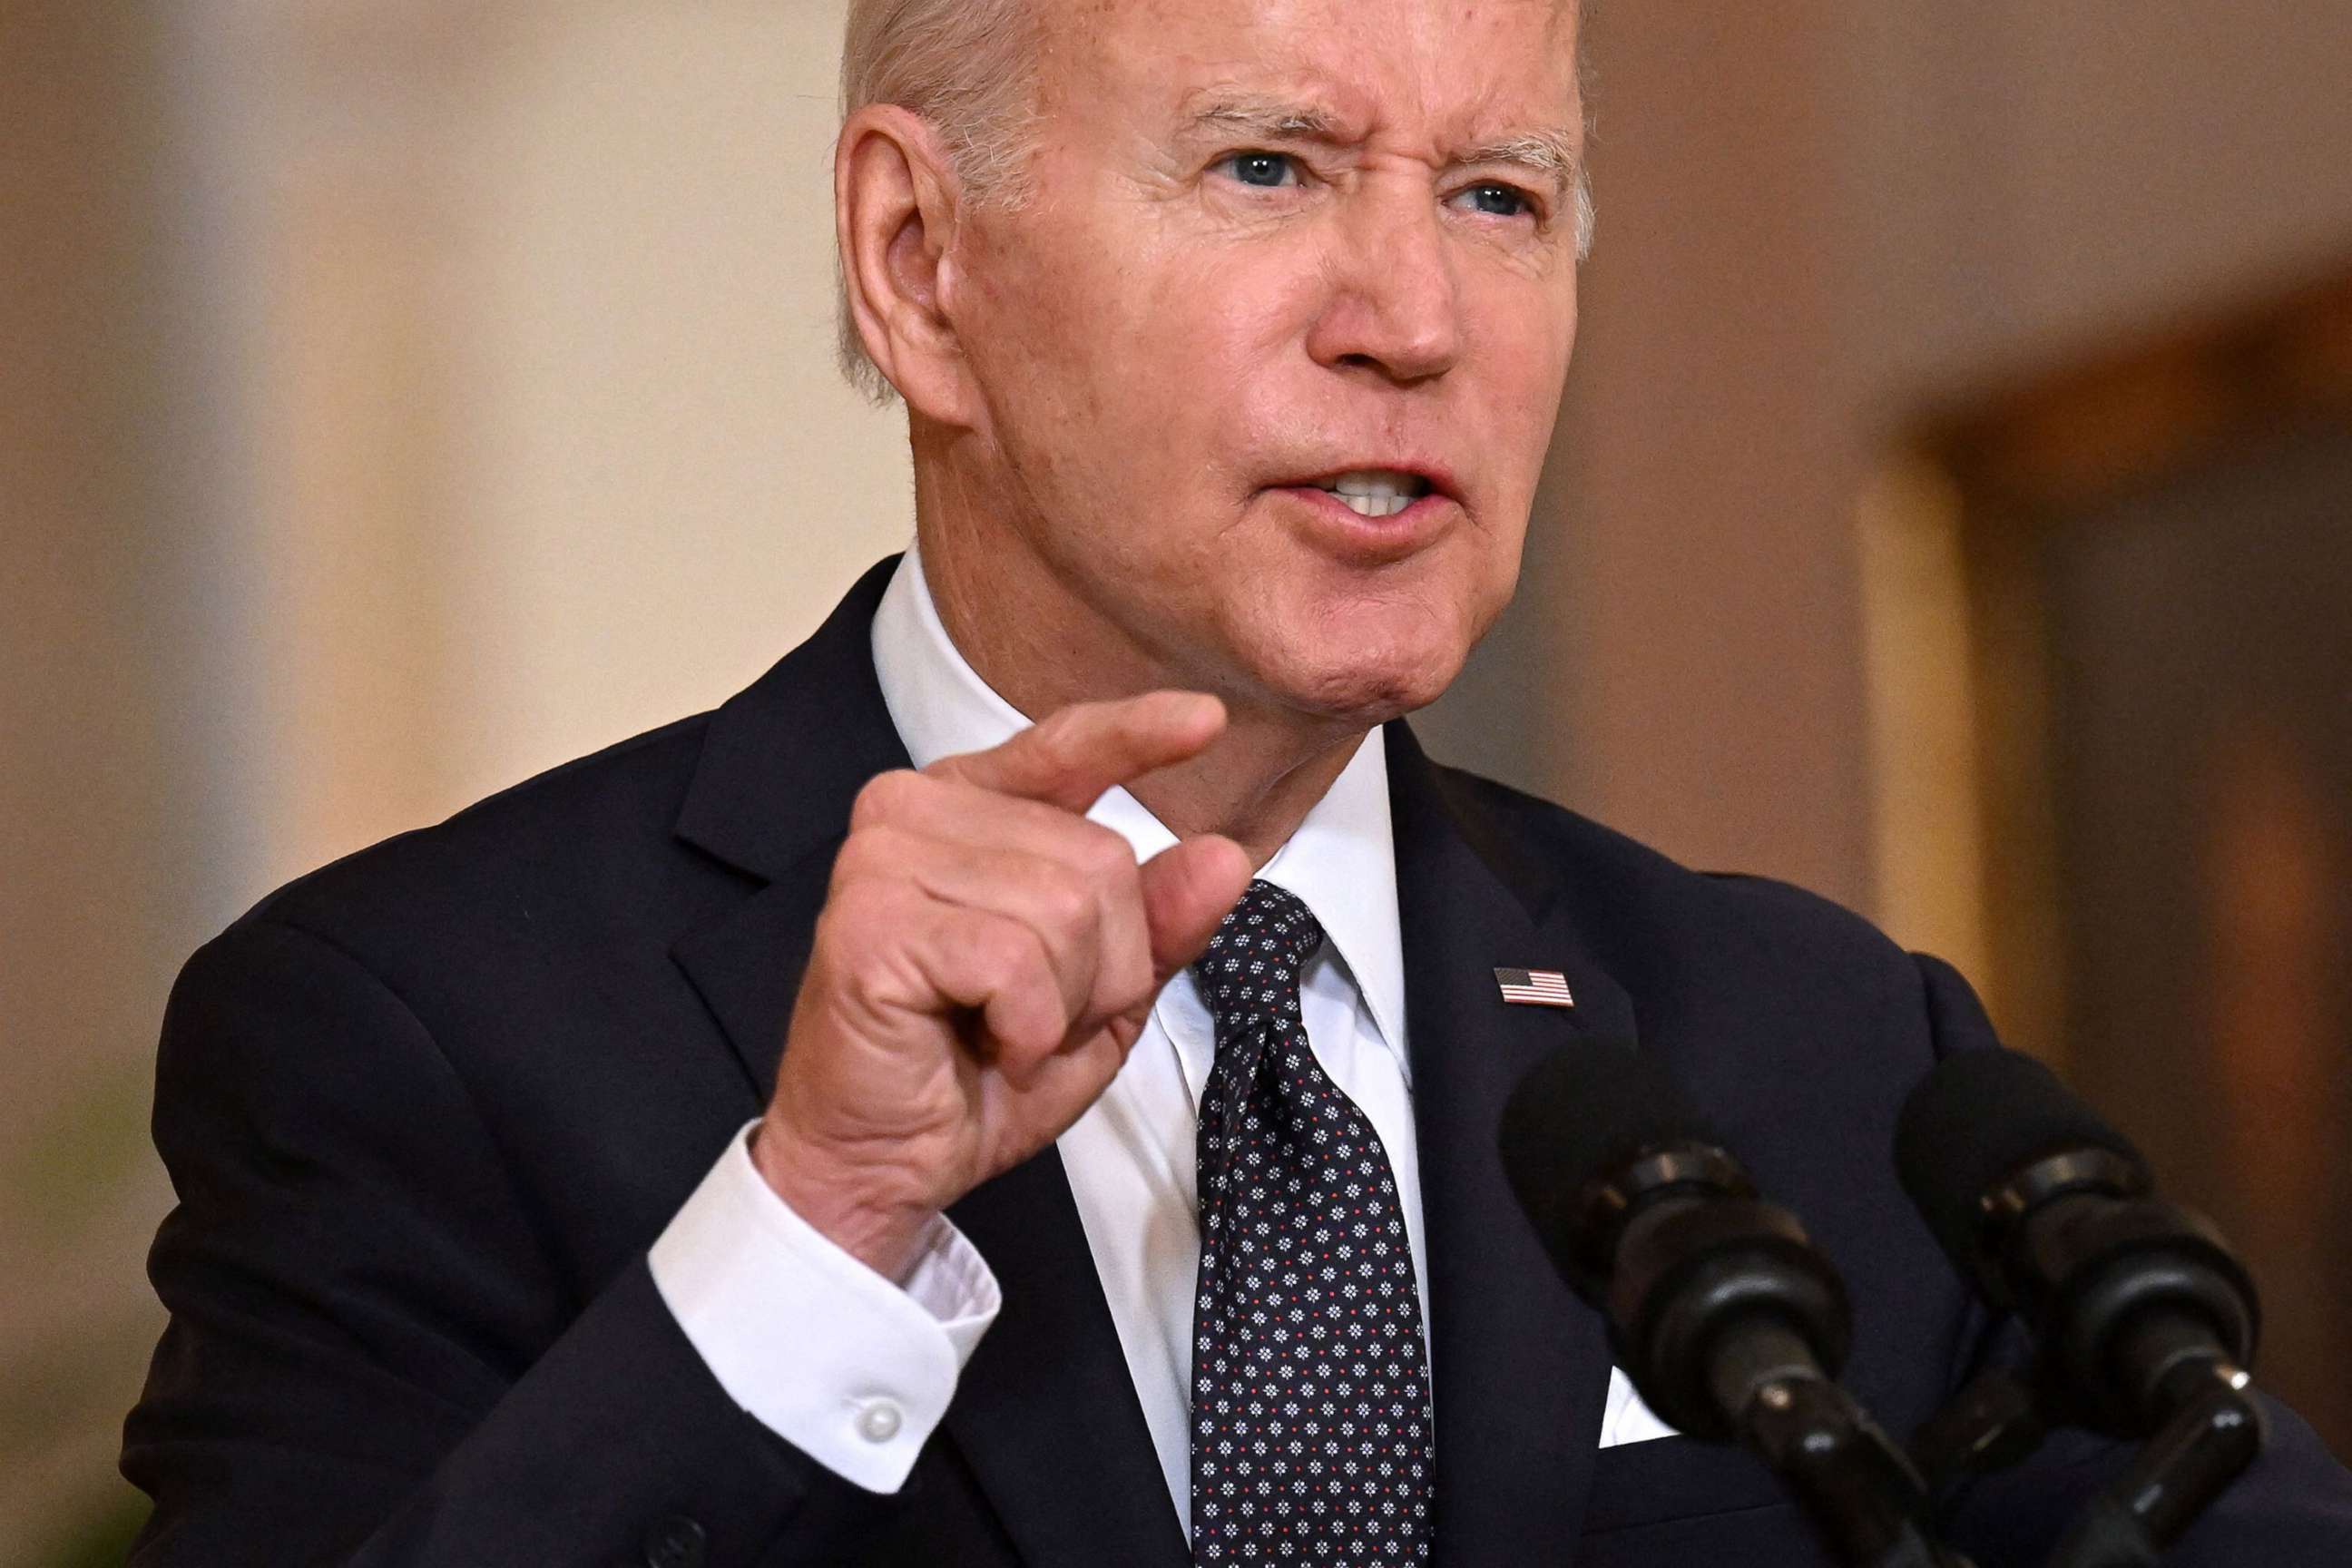 PHOTO: President Joe Biden speaks about the recent mass shootings and urges Congress to pass laws to combat gun violence at the Cross Hall of the White House in Washington, June 2, 2022.